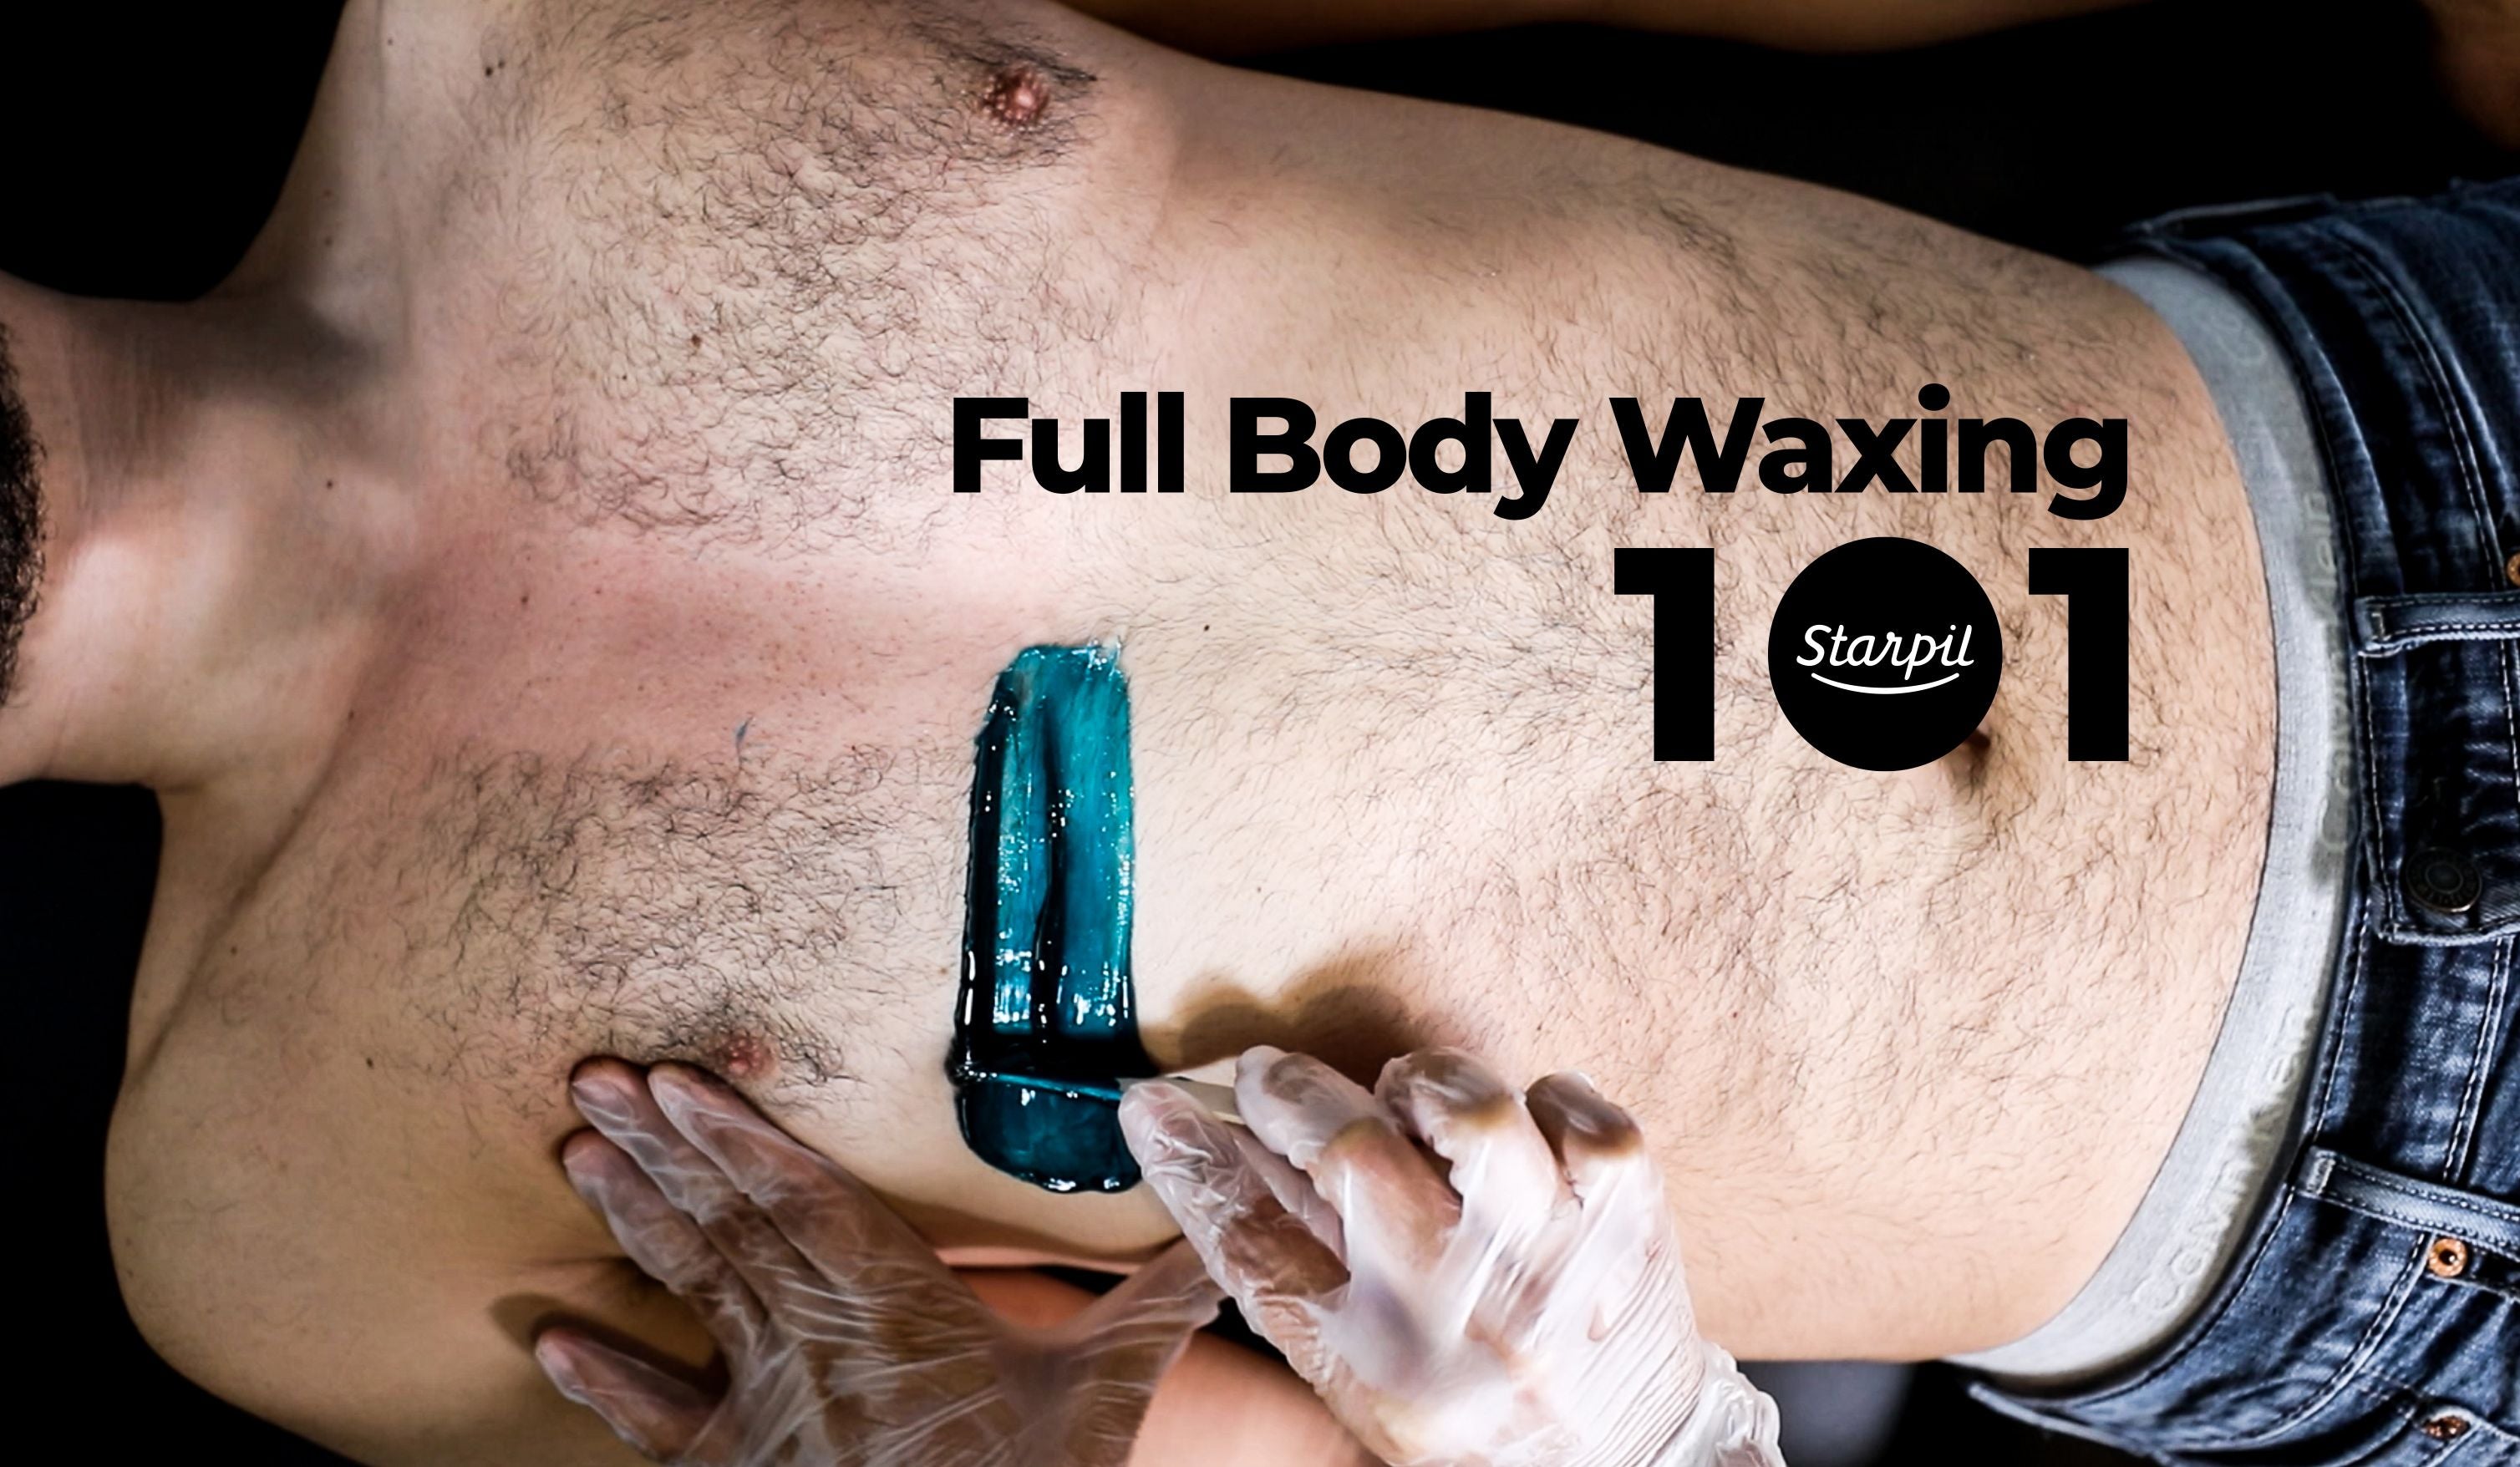 What Is a Full Body Wax?